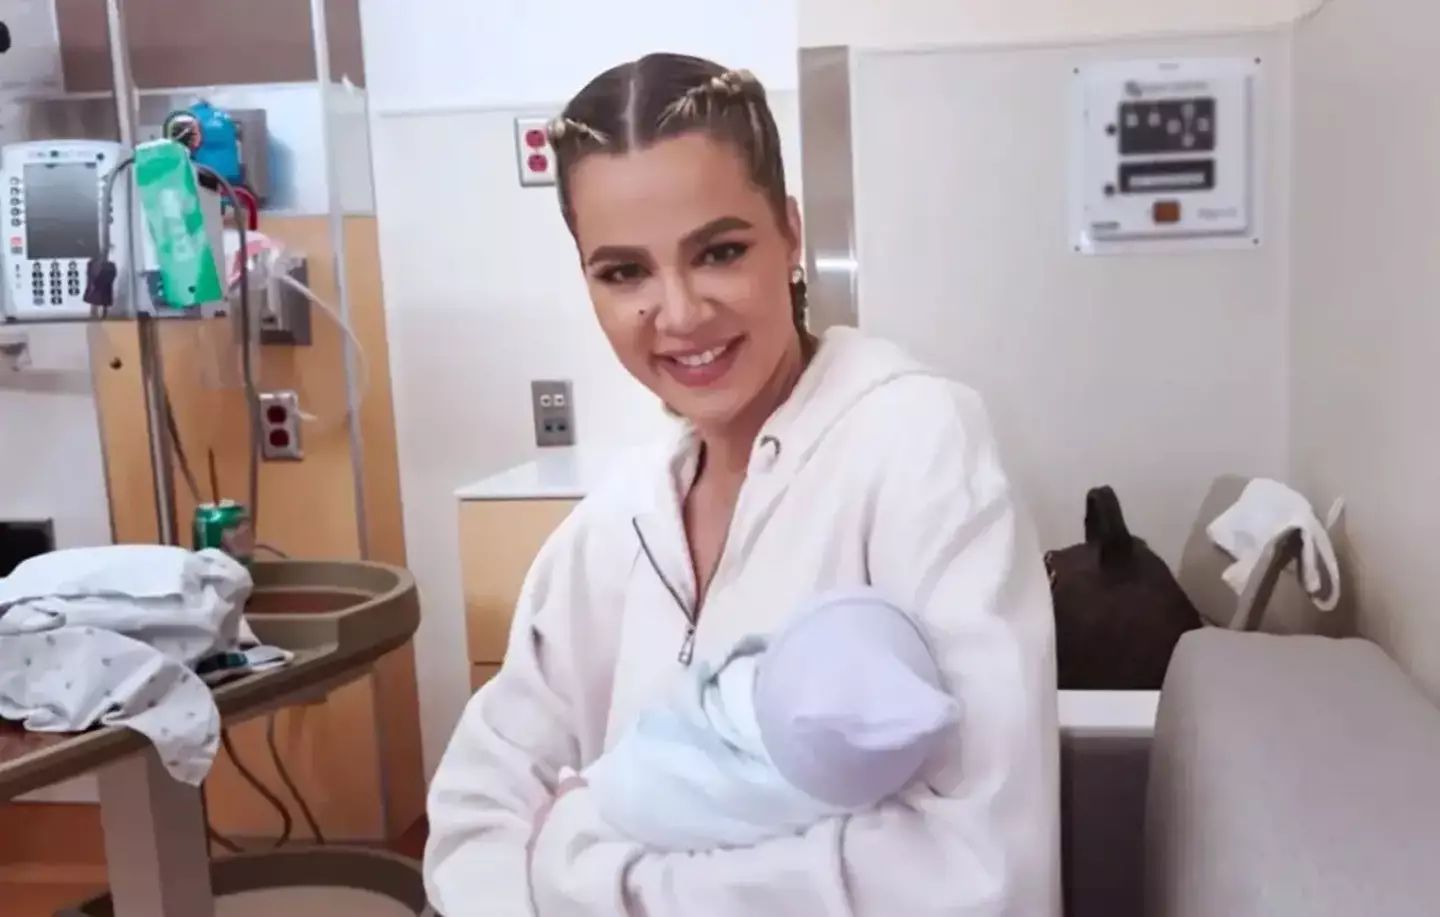 Khloé welcomed her second child via surrogate in July.